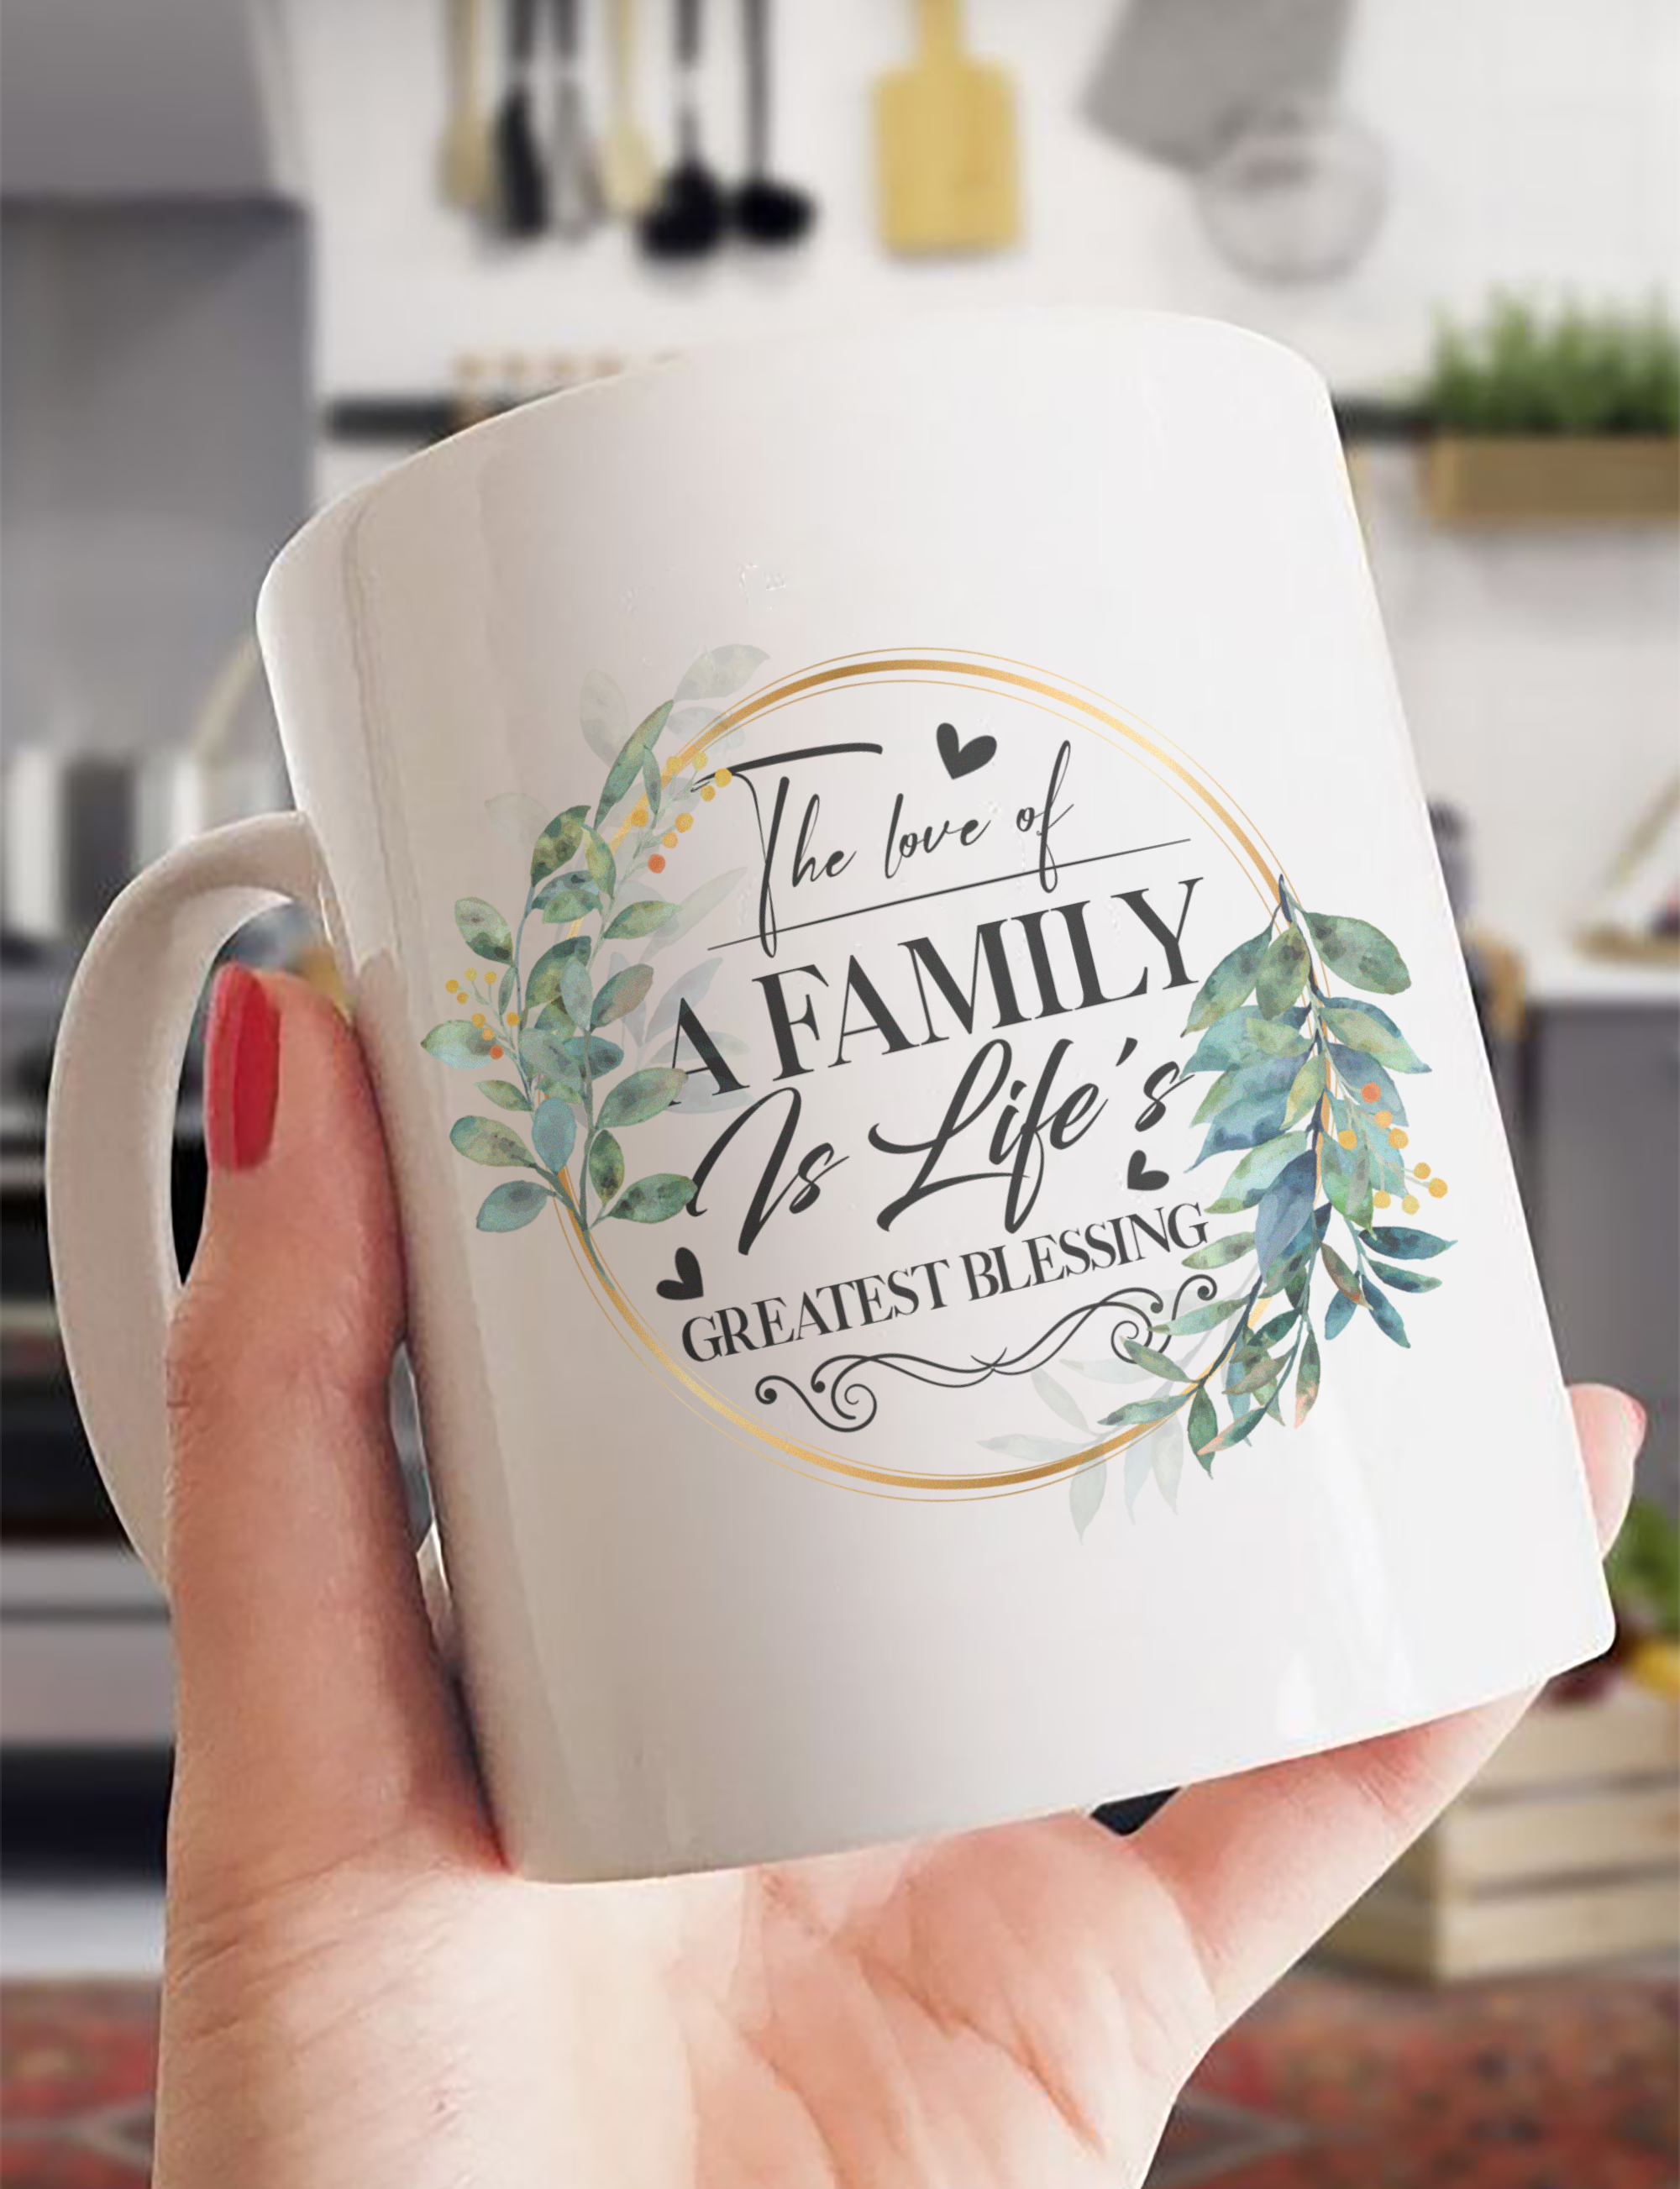 The Love Of A Family Is Life's Greatest Blessing - White Mug MG07